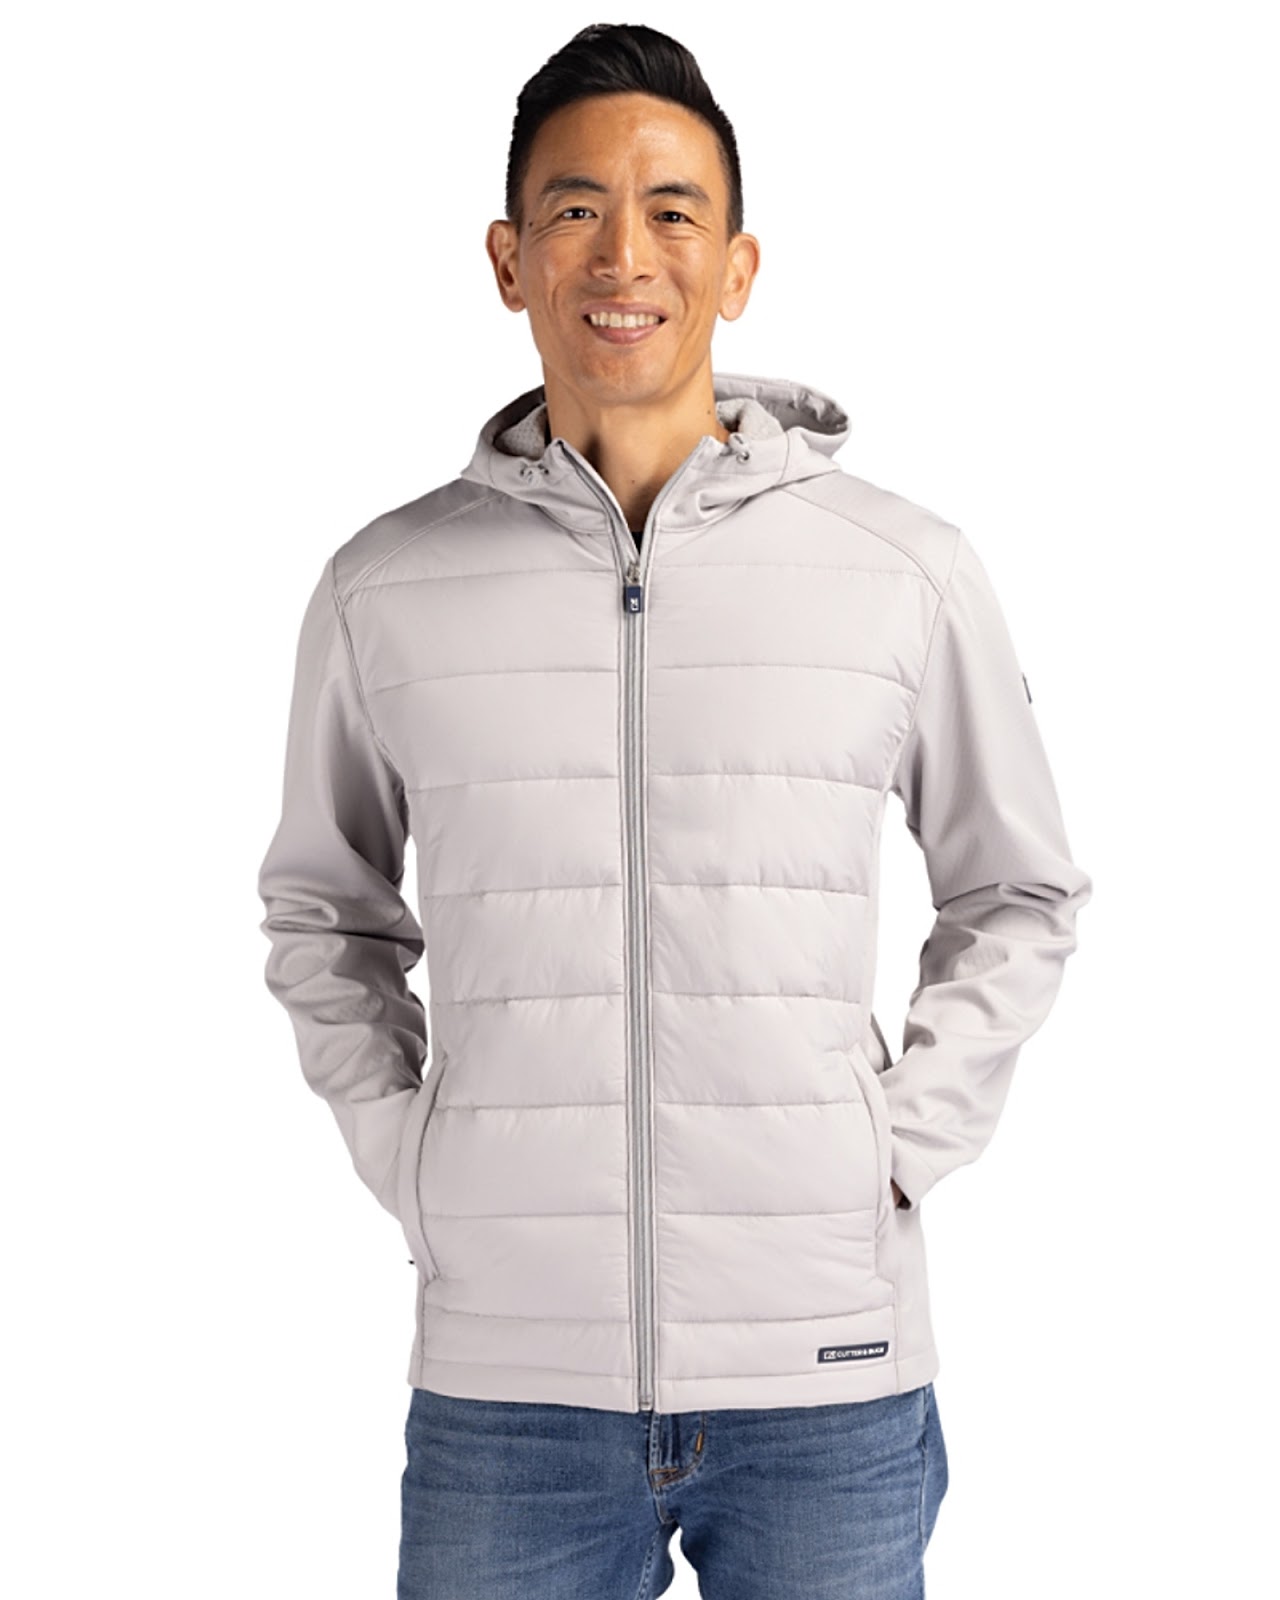 Best men's soft shell jackets for 2023